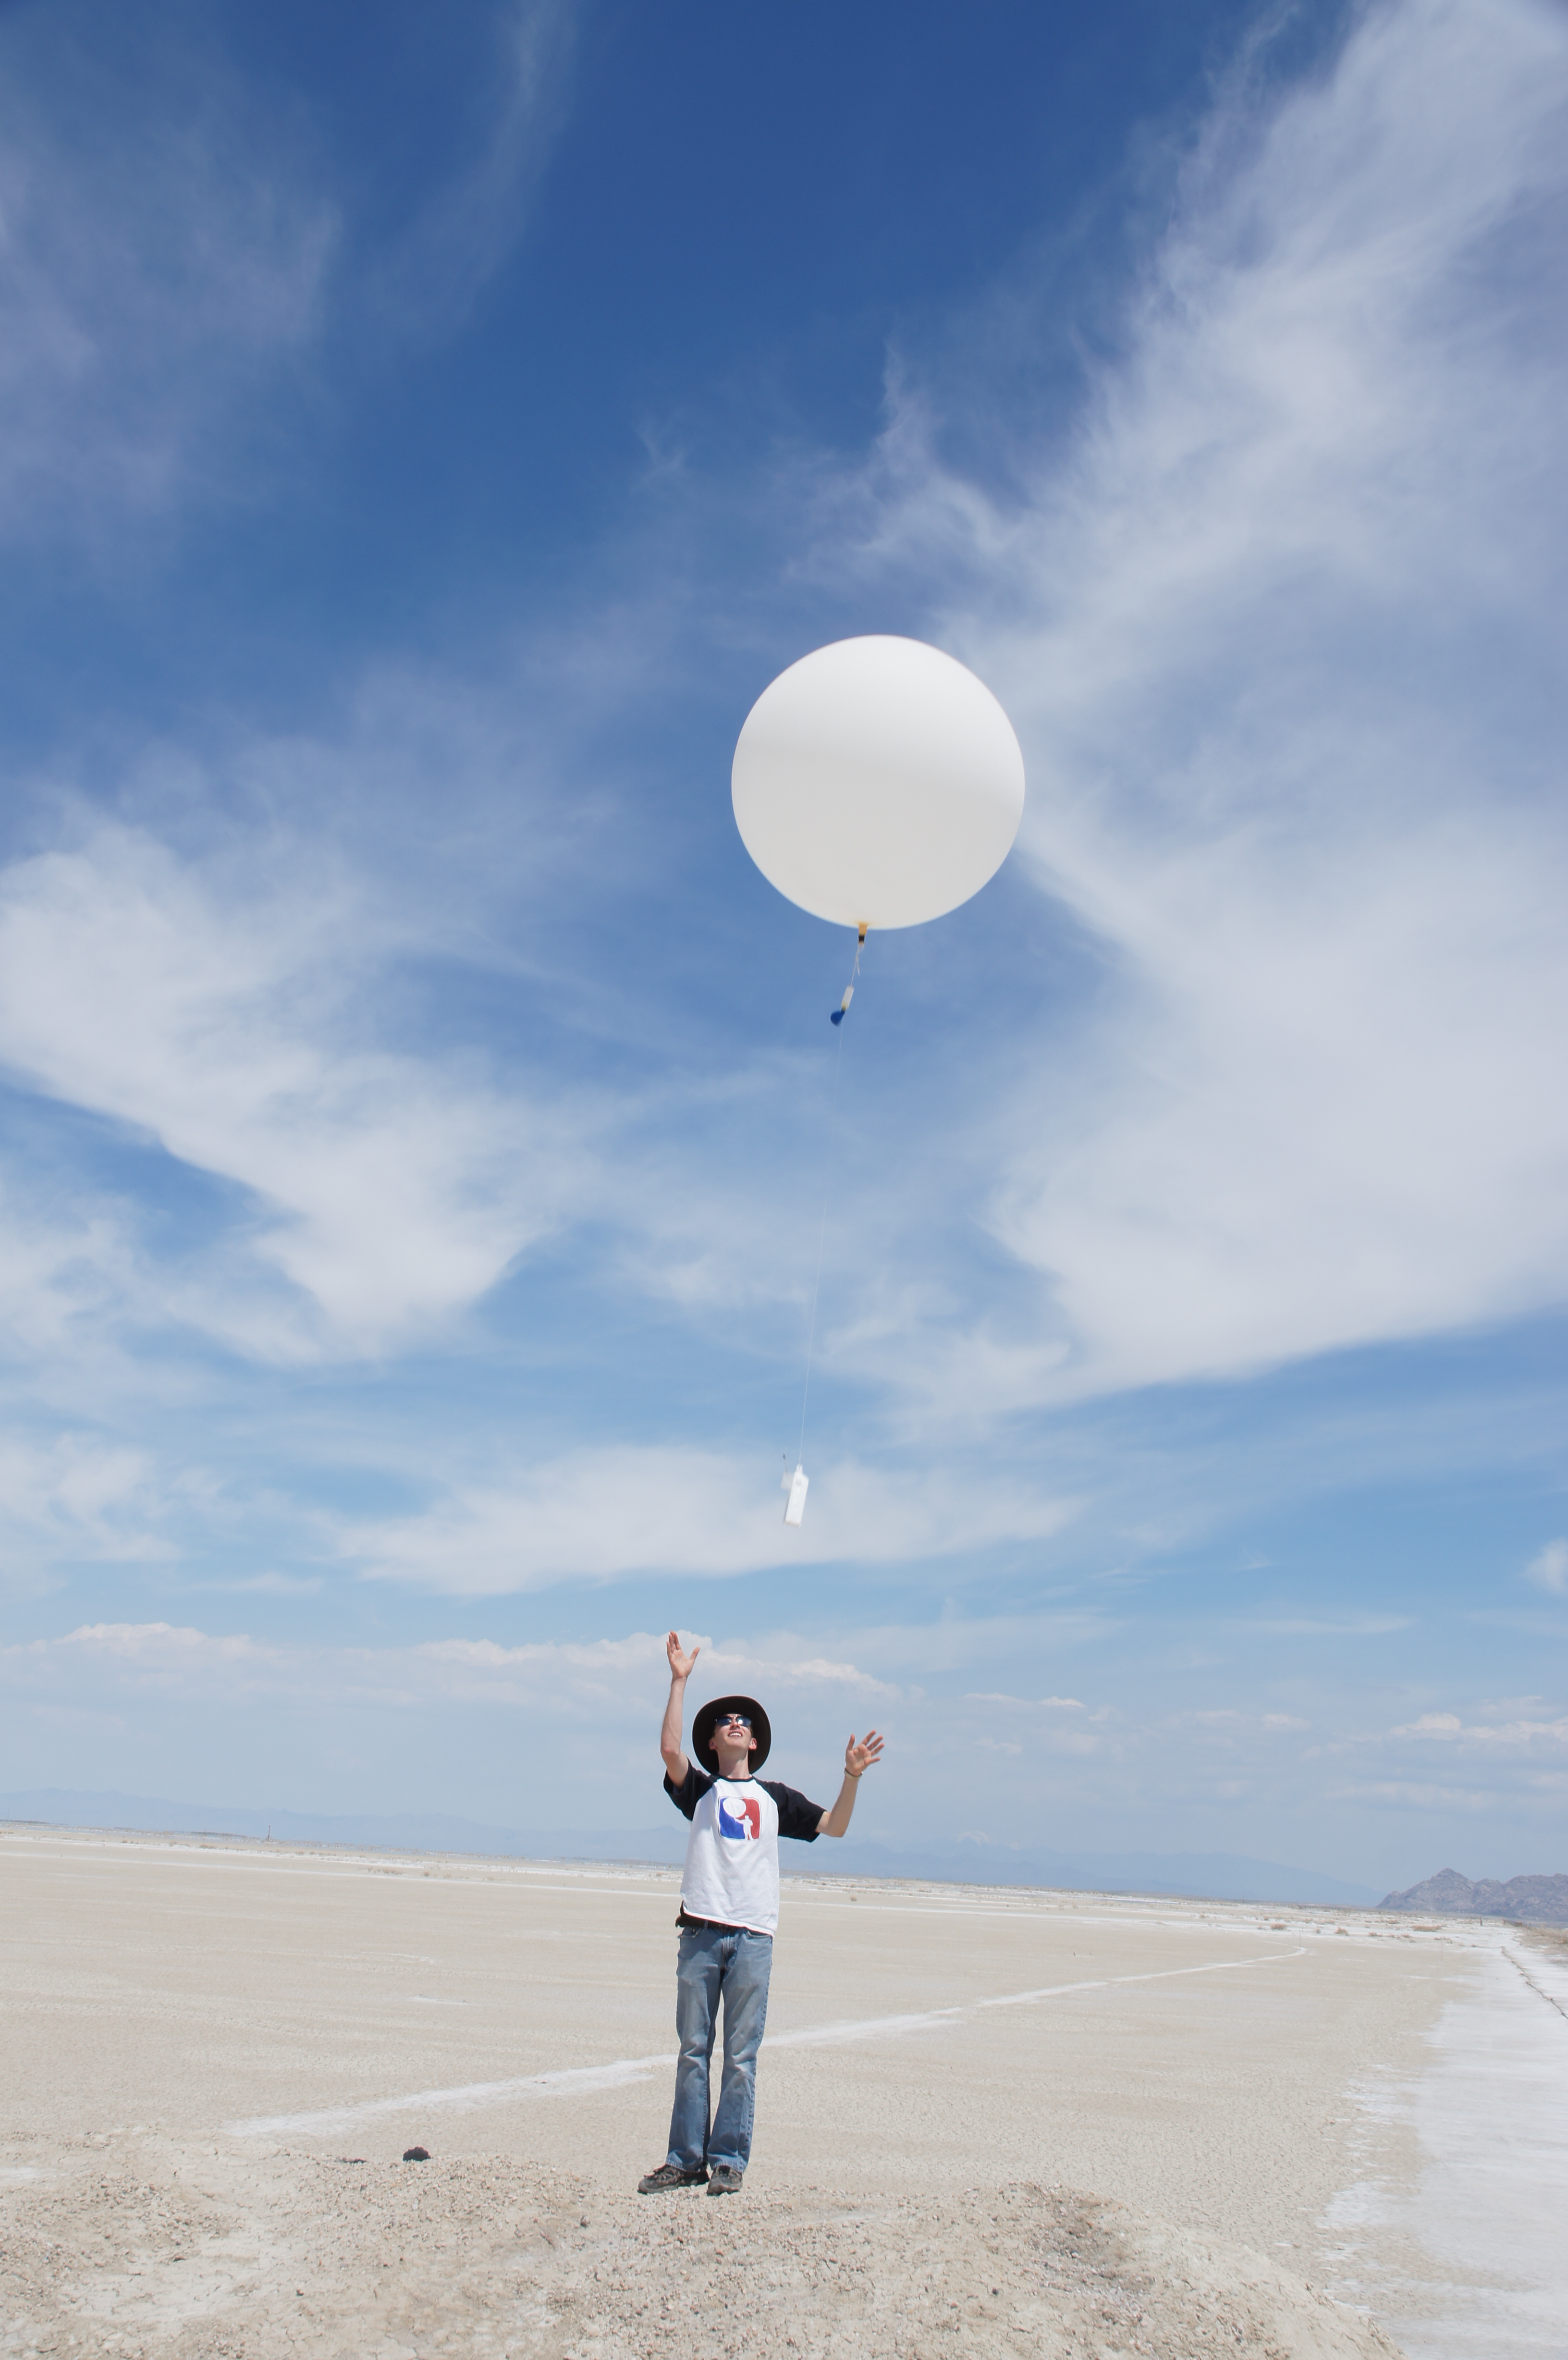 Graduate student launching weather ballooon during field experiement